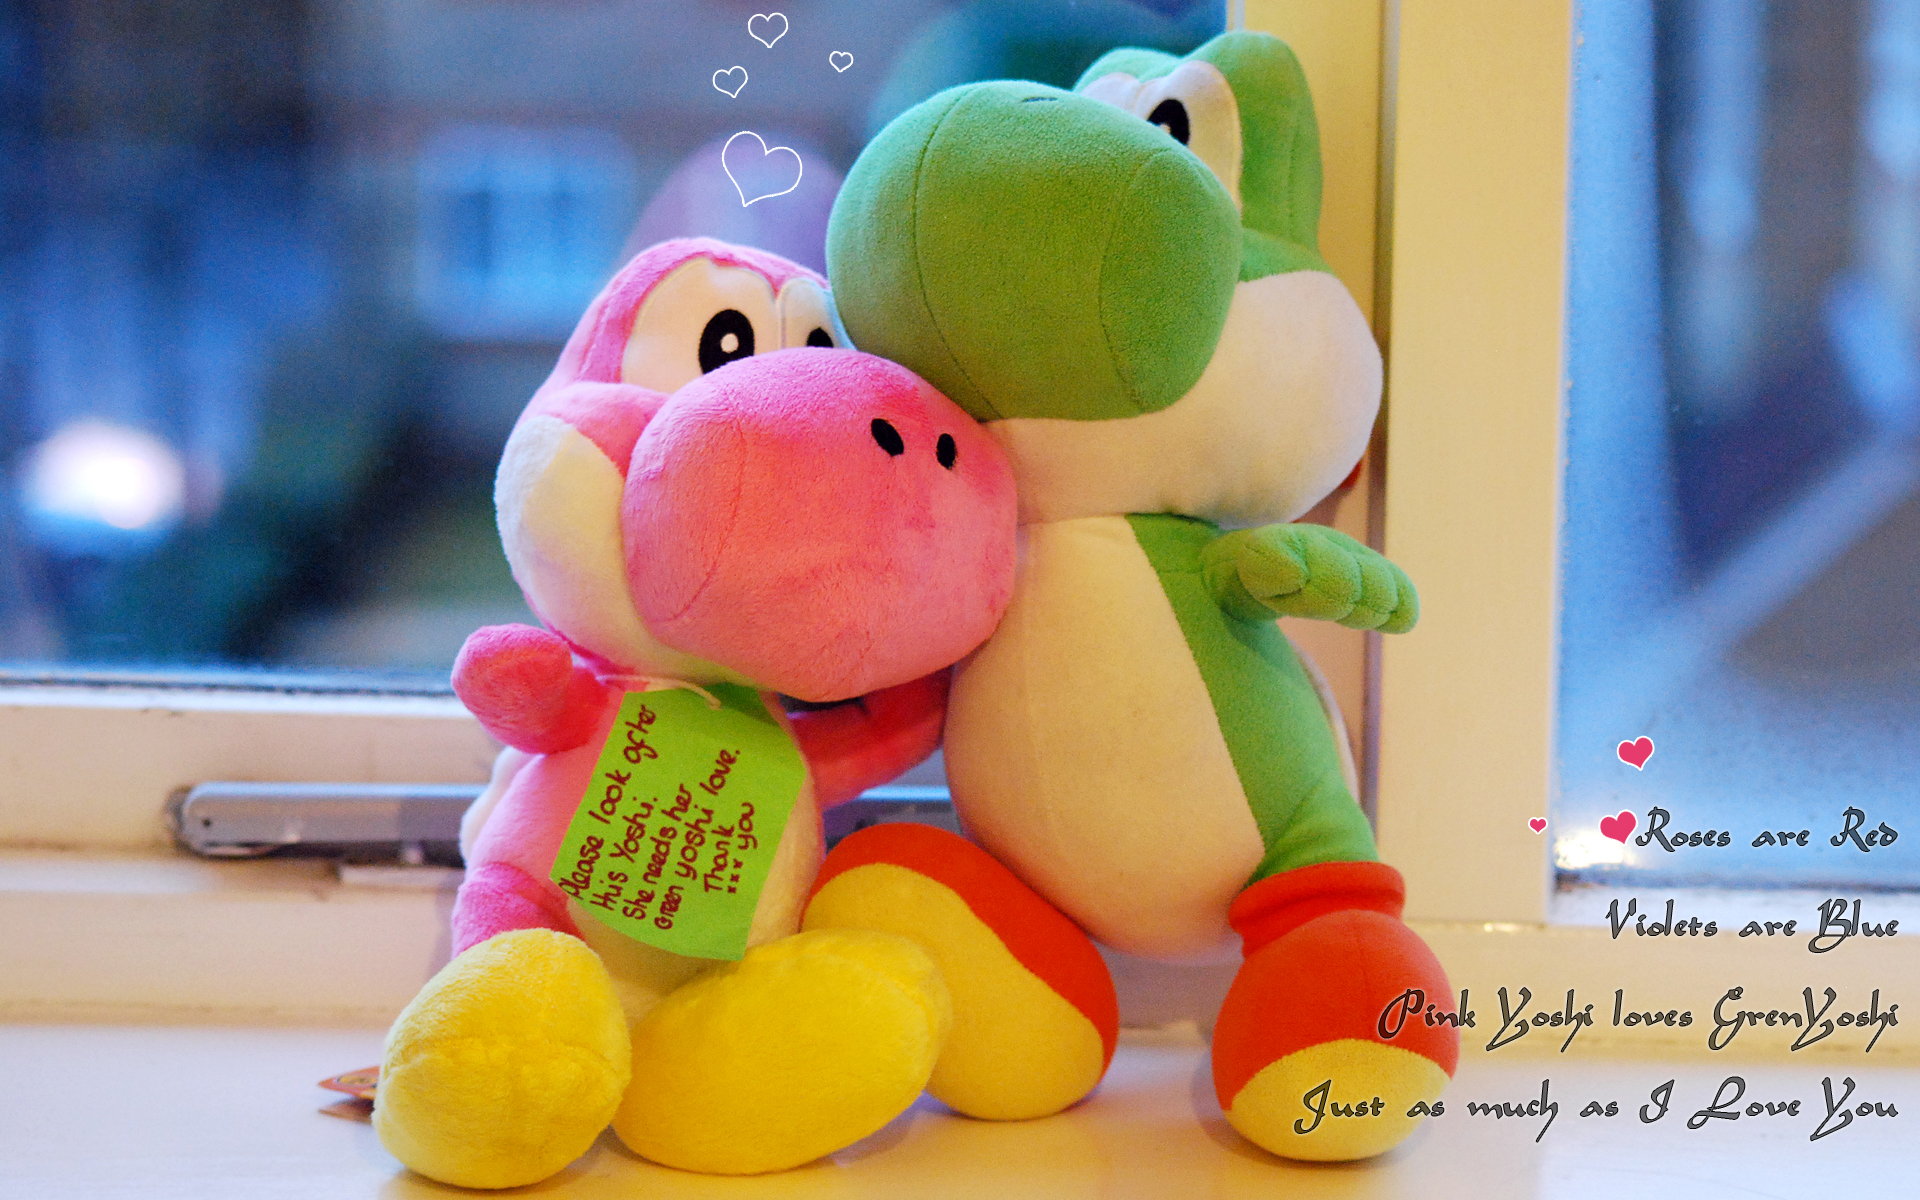 3d обои Розовый и зеленый крокодильчики на подоконнике (Roses are Red Videts are blue Pink yoshi loves Gren Yoshi Just as much As I Love You.....) Записочка в руках (Please look octes this Yoshi. She needs her green yoshi love. Thank you ***))  игрушки # 41442